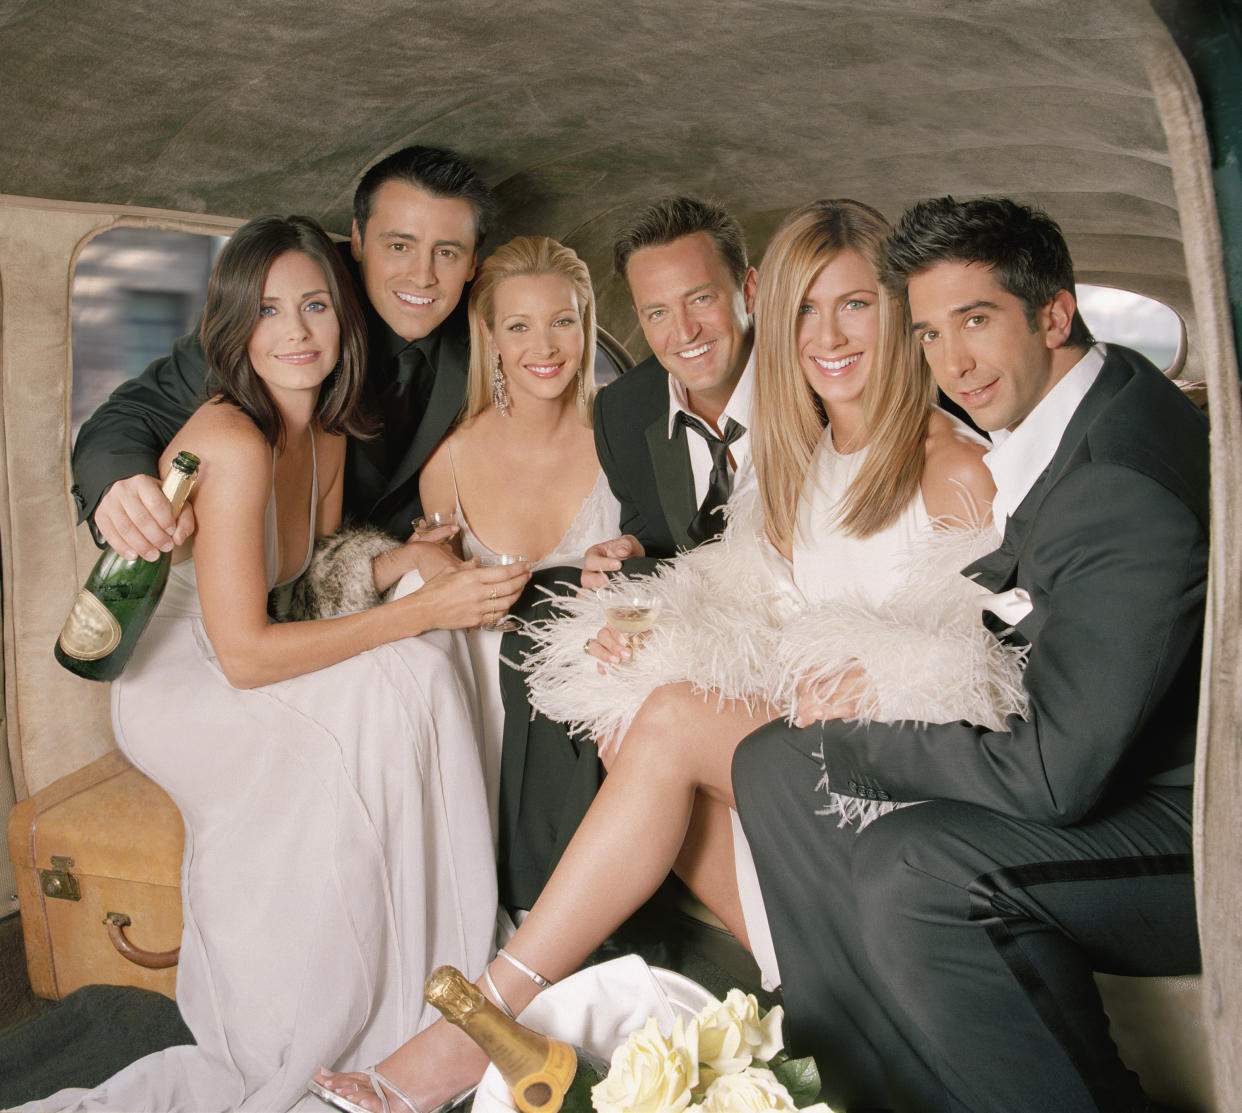 The Friends cast is offering fans the chance to attend their reunion taping — for a good cause. (Photo: NBCU Photo Bank/NBCUniversal via Getty Images via Getty Images)